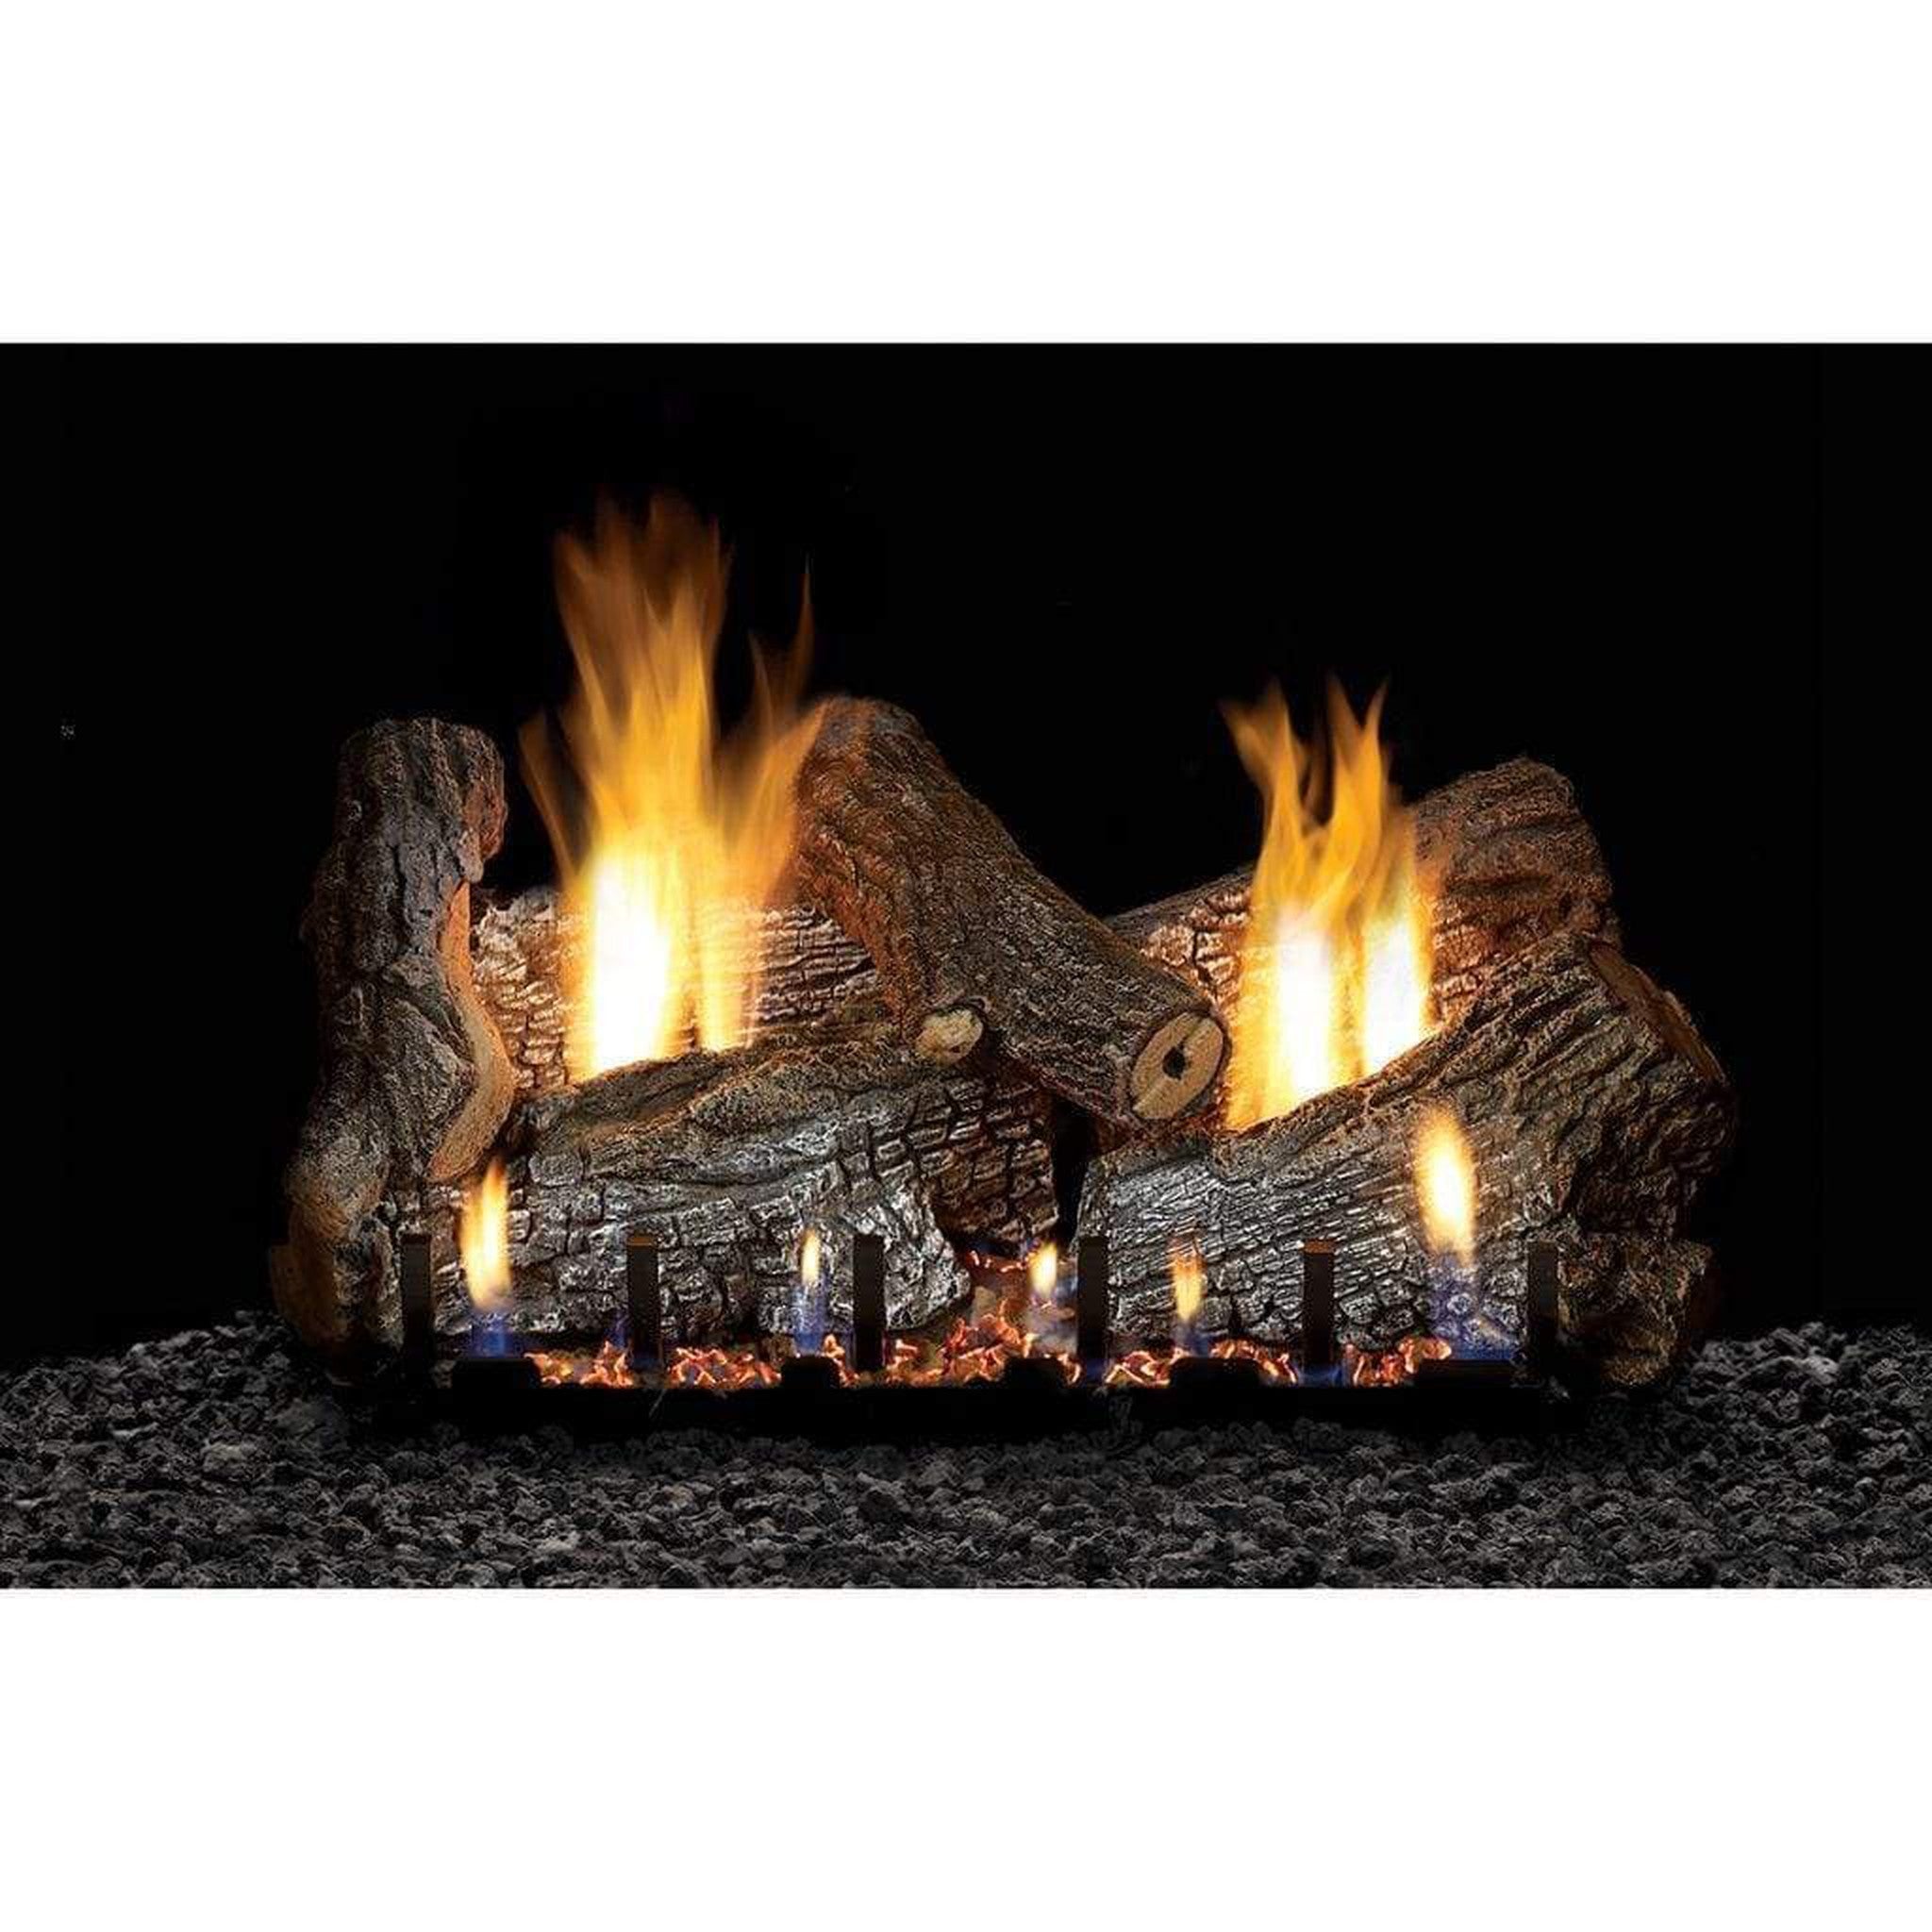 Empire 36 inch Vail Vent-Free Fireplace - VFPA36BP